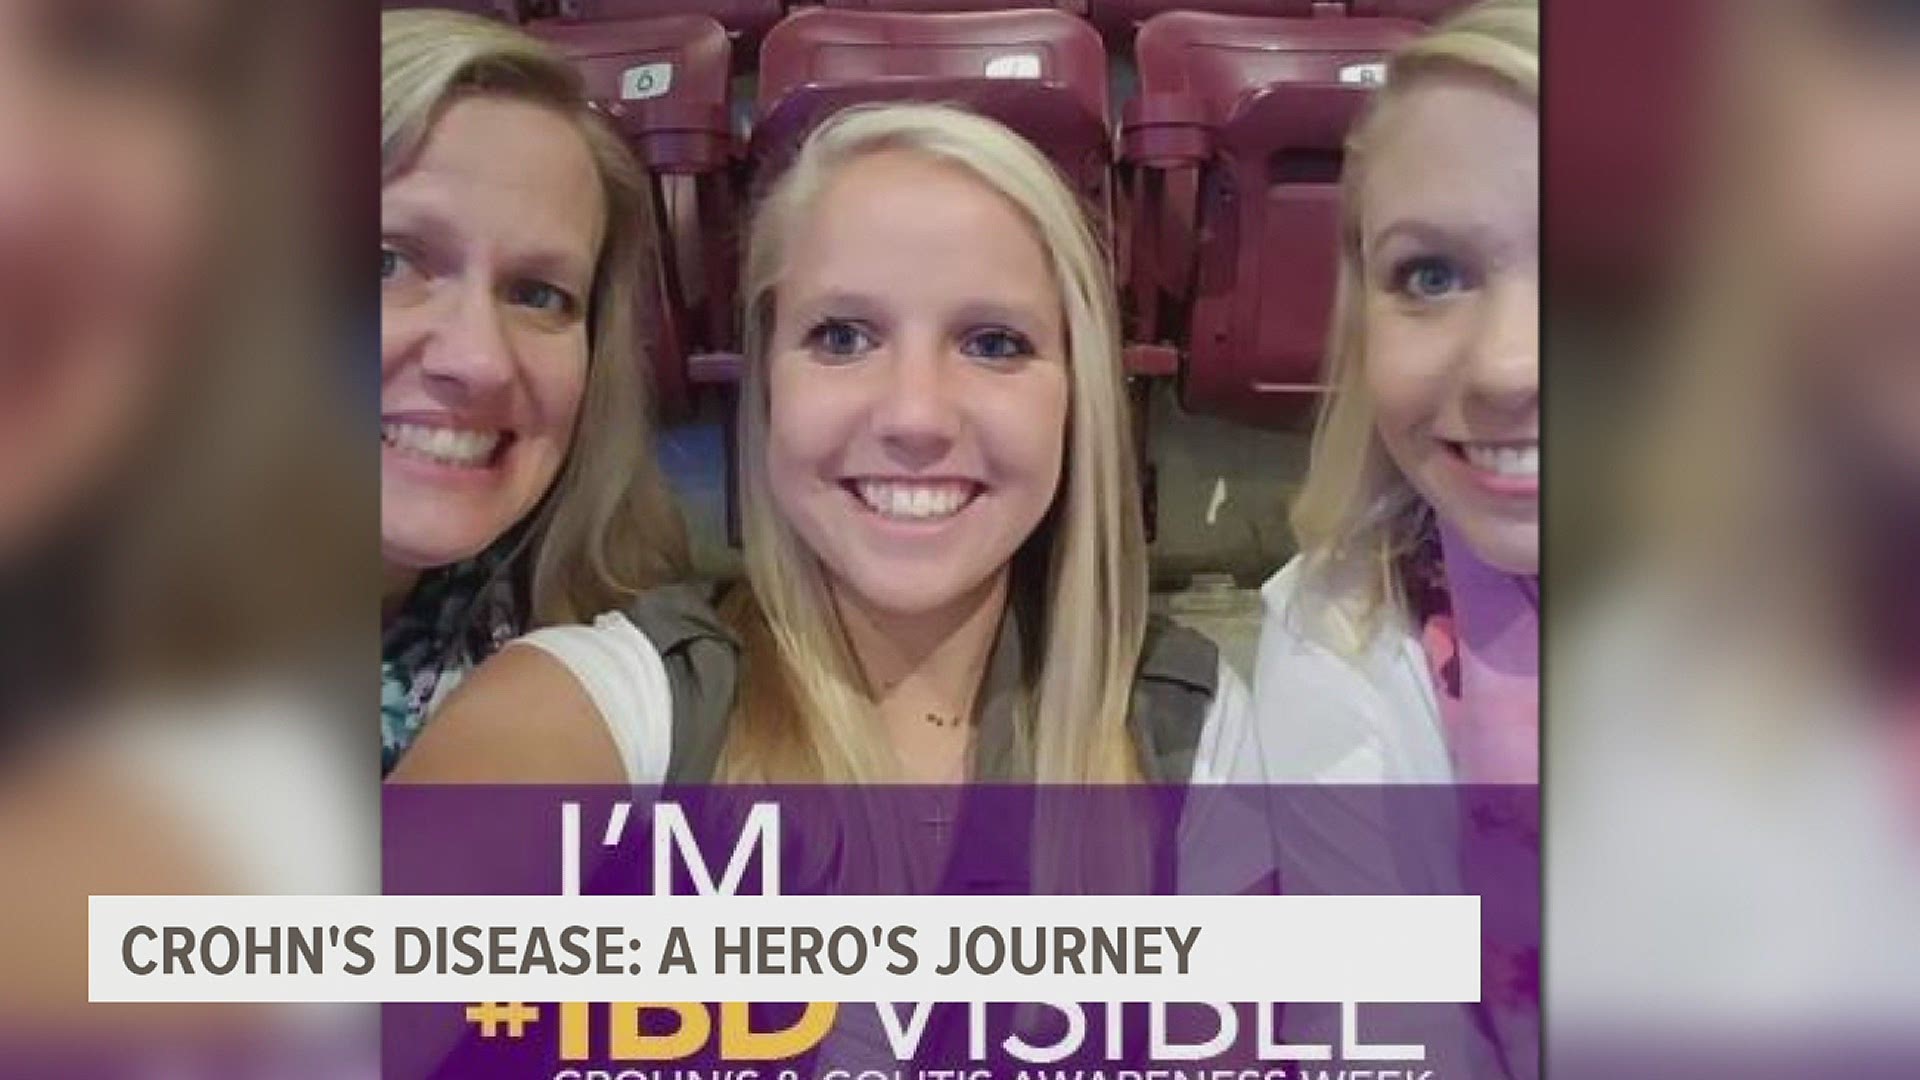 Holly Hoy of Mechanicsburg, Cumberland County, knows a thing or two about living with a Crohn's disease. The now 26-year-old was diagnosed at just 10-years-old.